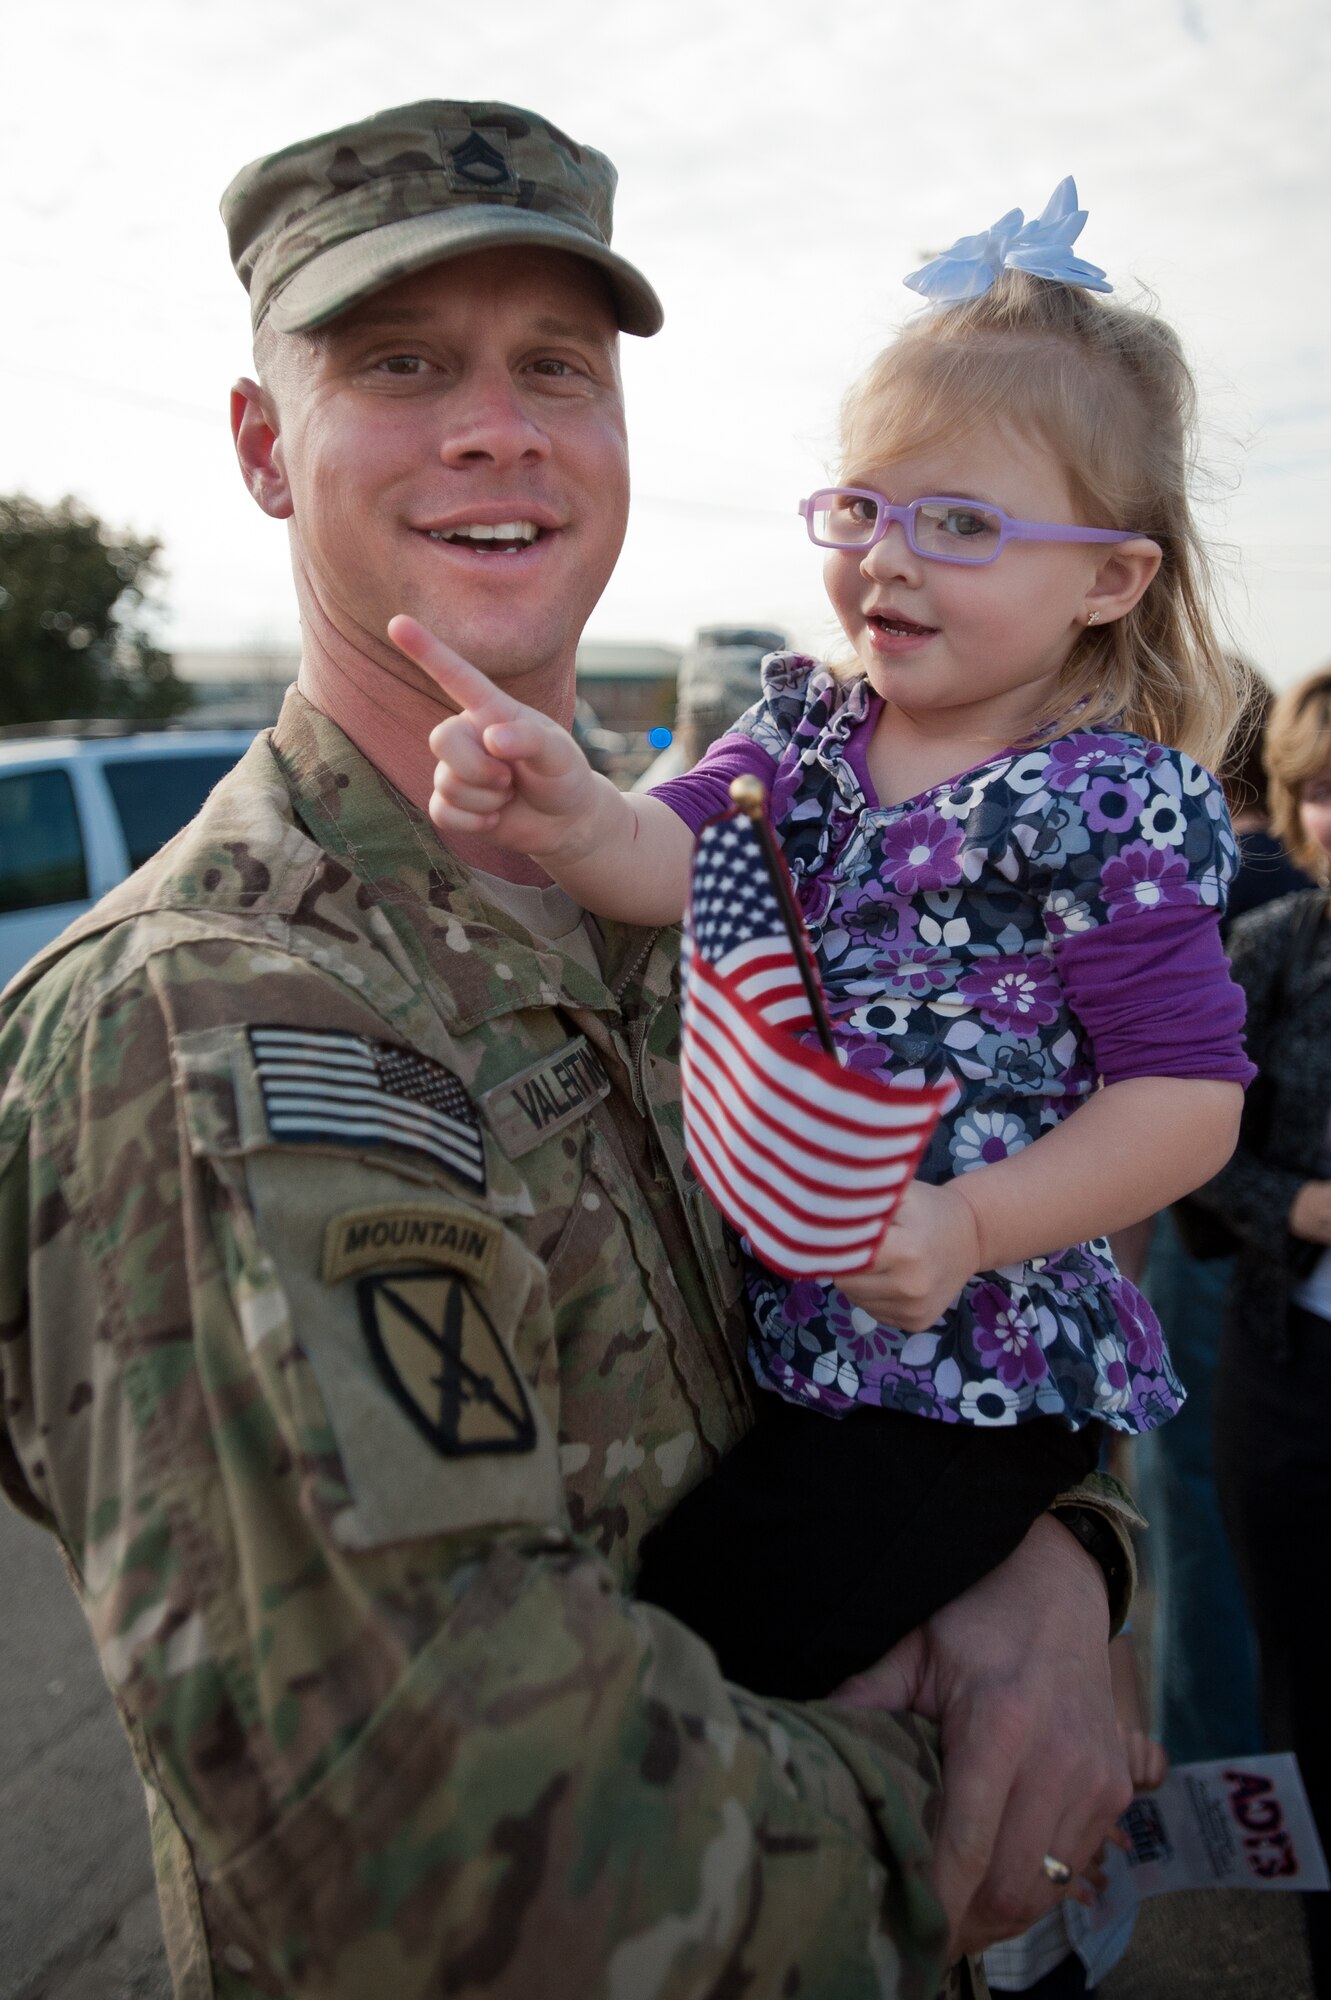 Staff Sgt. Jeff Valentine holds his daughter, Taylor, for the first time in nine months during a welcome-home ceremony held Feb 28, 2012, at the Kentucky Air National Guard Base in Louisville, Ky. Valentine was one of 58 Kentucky Army and Air National Guard Soldiers and Airmen who have been deployed to Afghanistan as part of the Kentucky National Guard's Agribusiness Development Team 3. The team has been in Afghanistan since mid-2011, helping Afghan farmers develop sustainable agriculture. The group was instrumental in coordinating the first-ever commercial mulberry harvest in the Panshir Valley, producing 75 metric tons of mulberries and netting $45,000 for local farmers. (U.S. Air Force photo by Maj. Dale Greer)